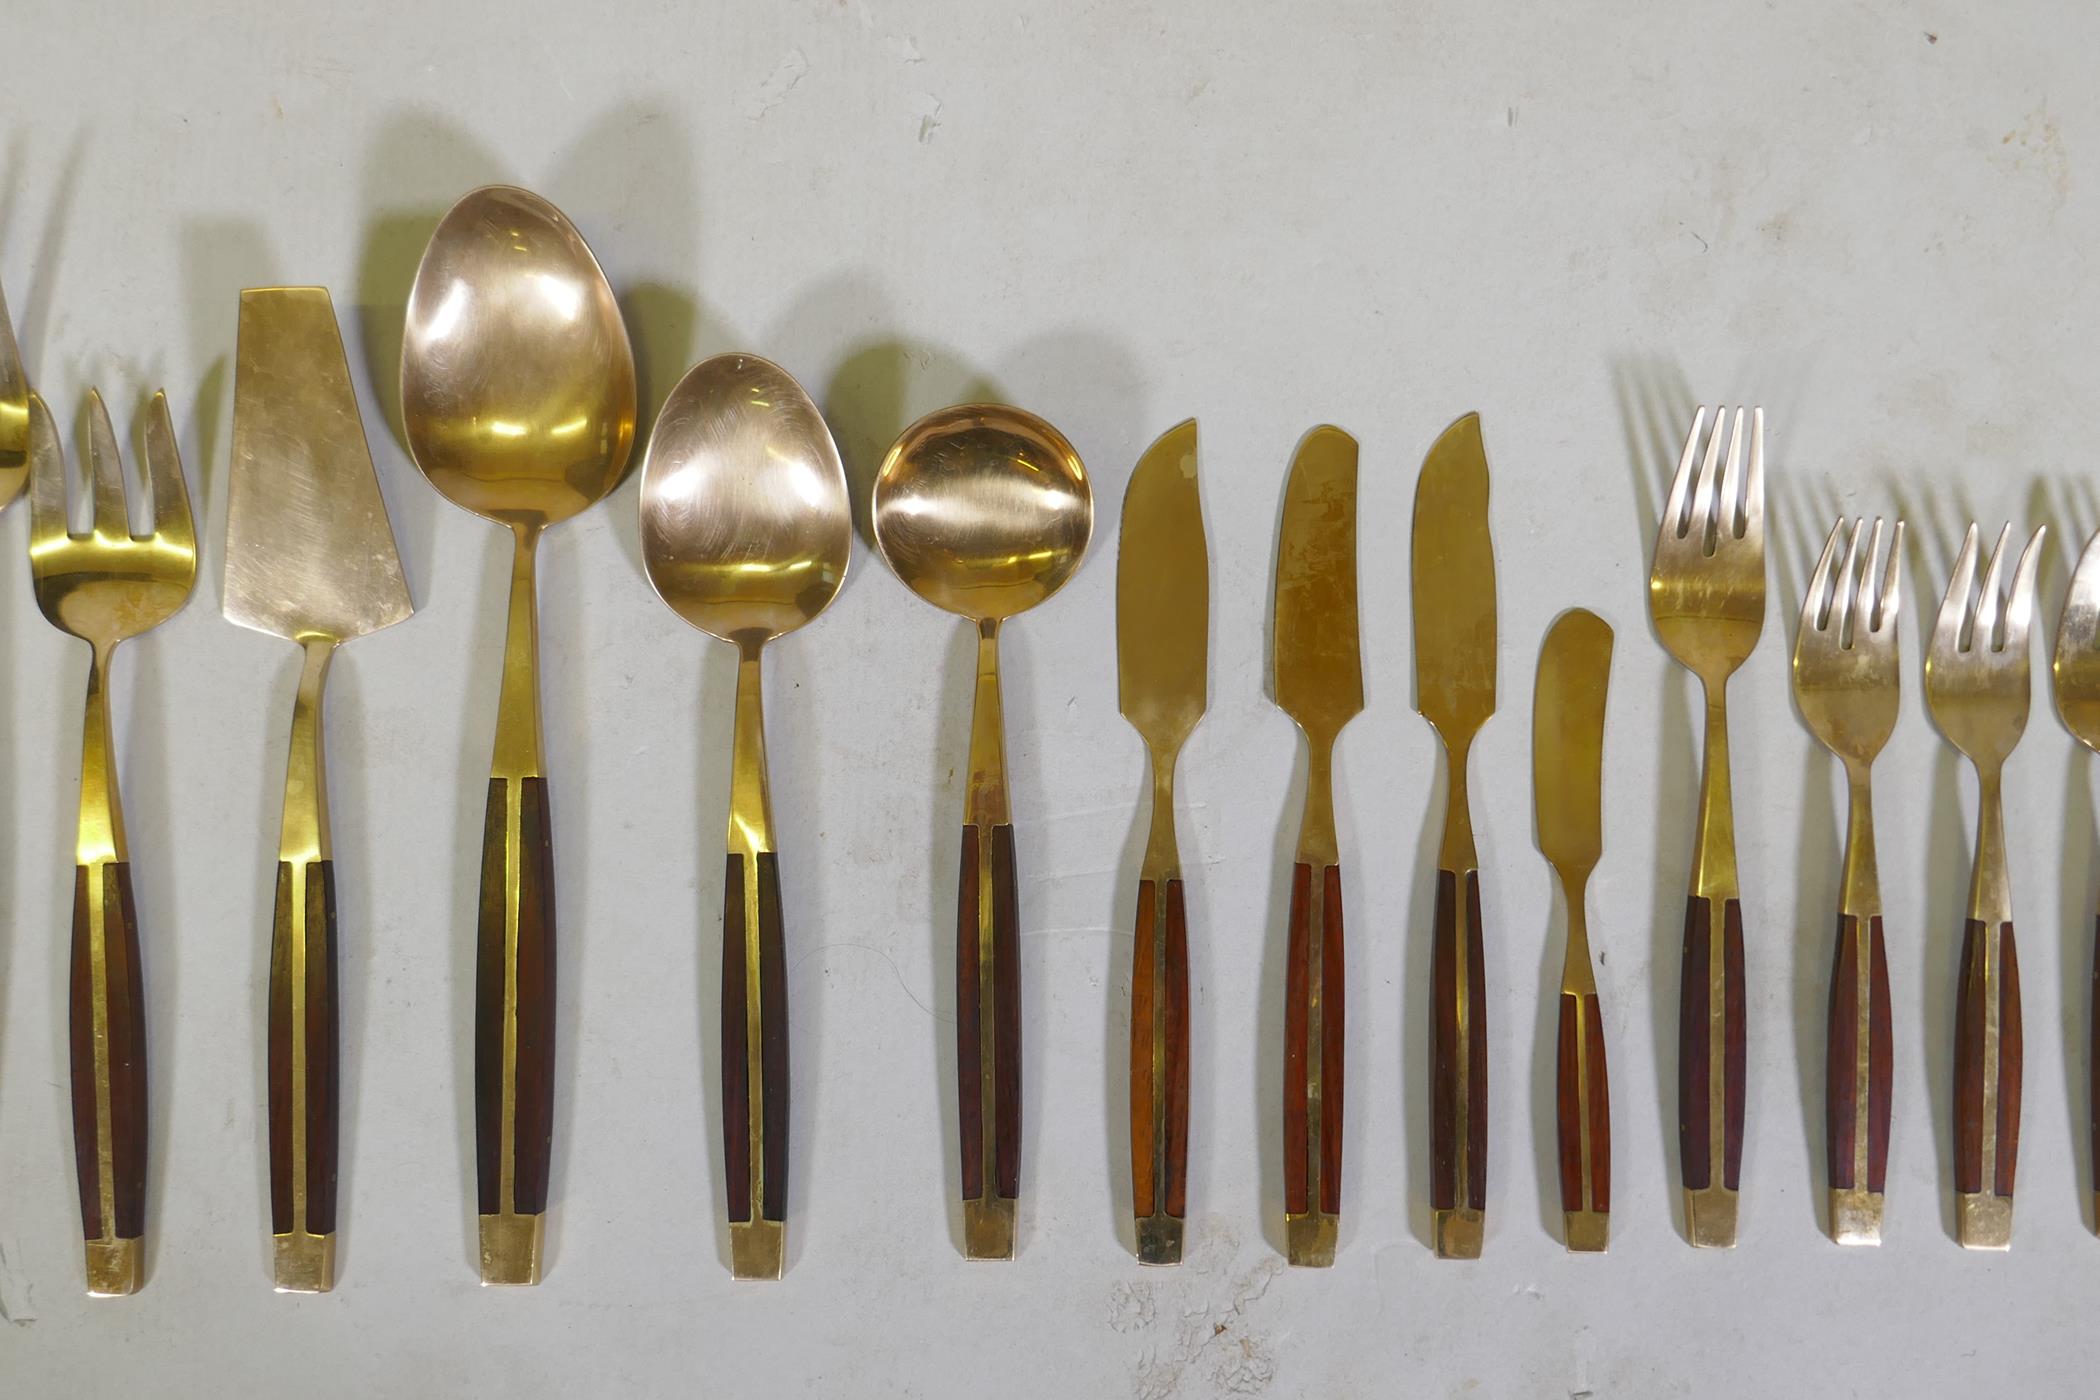 A canteen of brass and rosewood cutlery, probably Thai or Malaysian, 12 place settings - Image 6 of 7